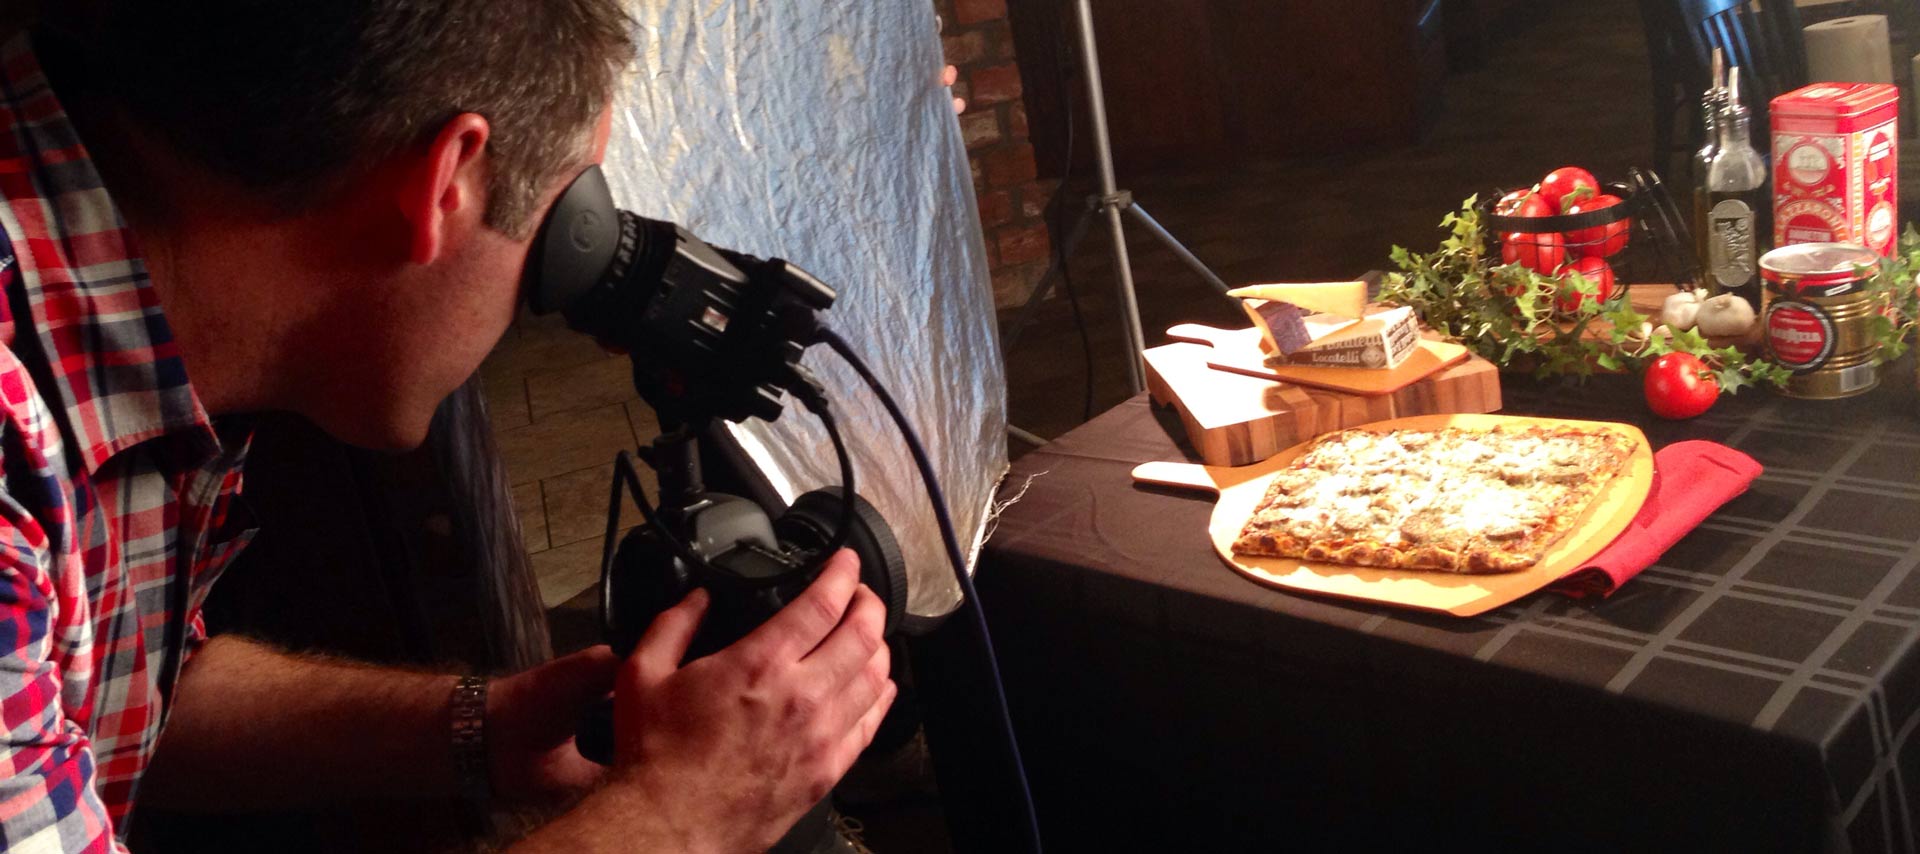 Food Photography & Video That Stands Out – In A Good Way